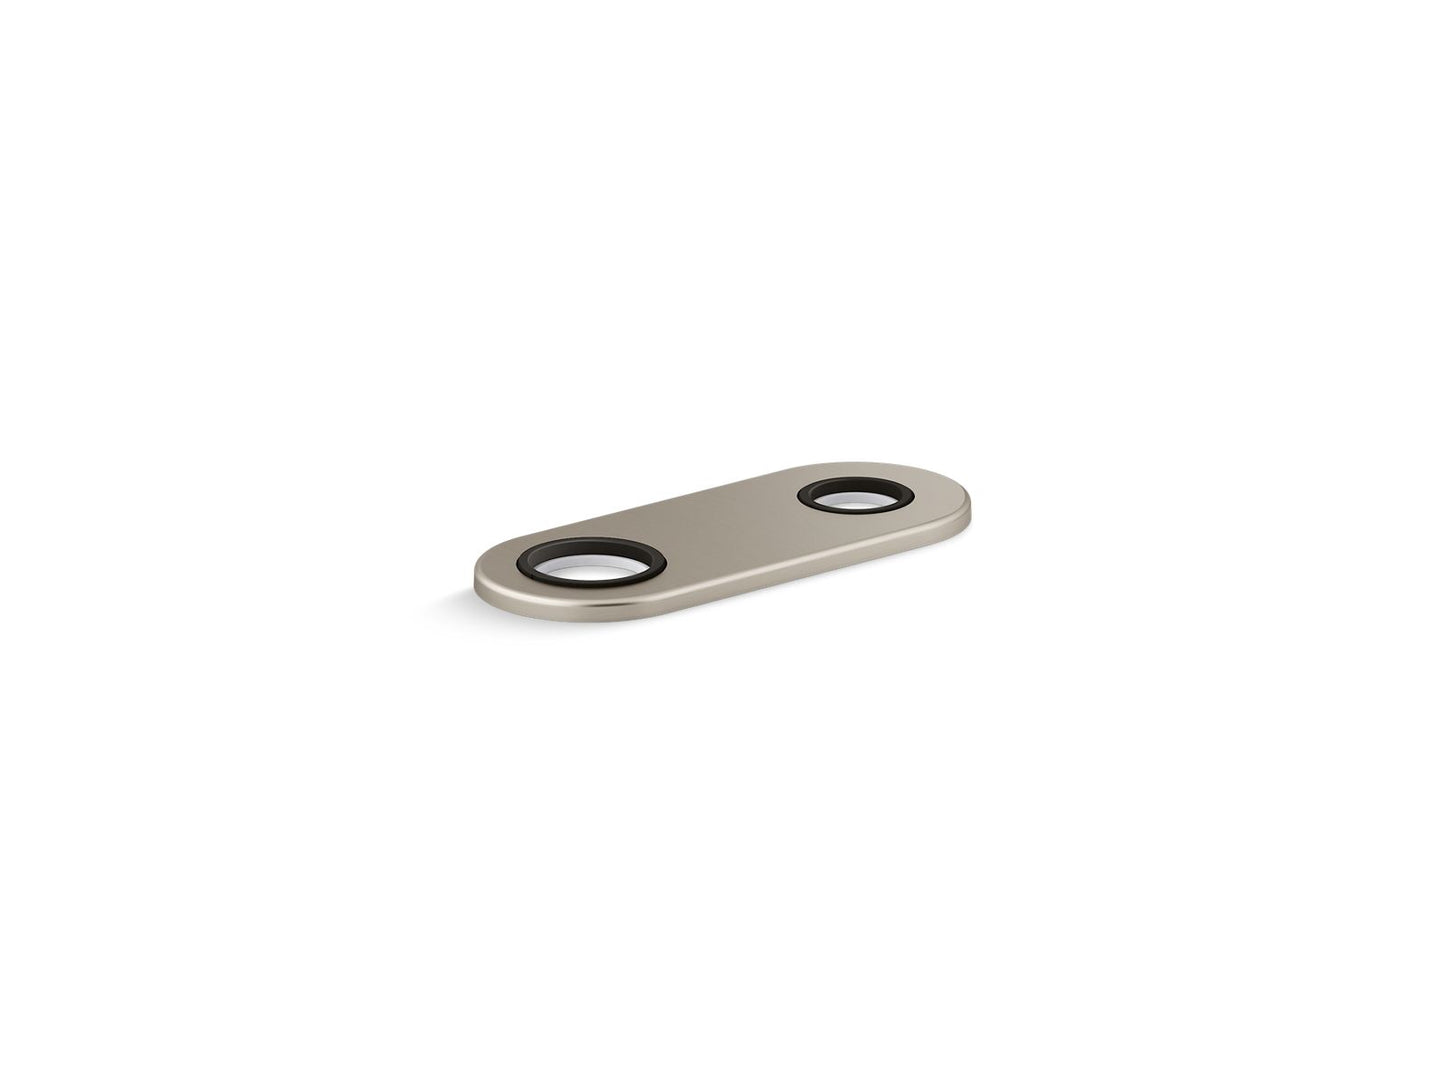 KOHLER K-38169-BN 4" Two-Hole Escutcheon Plate For Insight And Kinesis Lavatory Faucets And Soap Dispensers In Vibrant Brushed Nickel